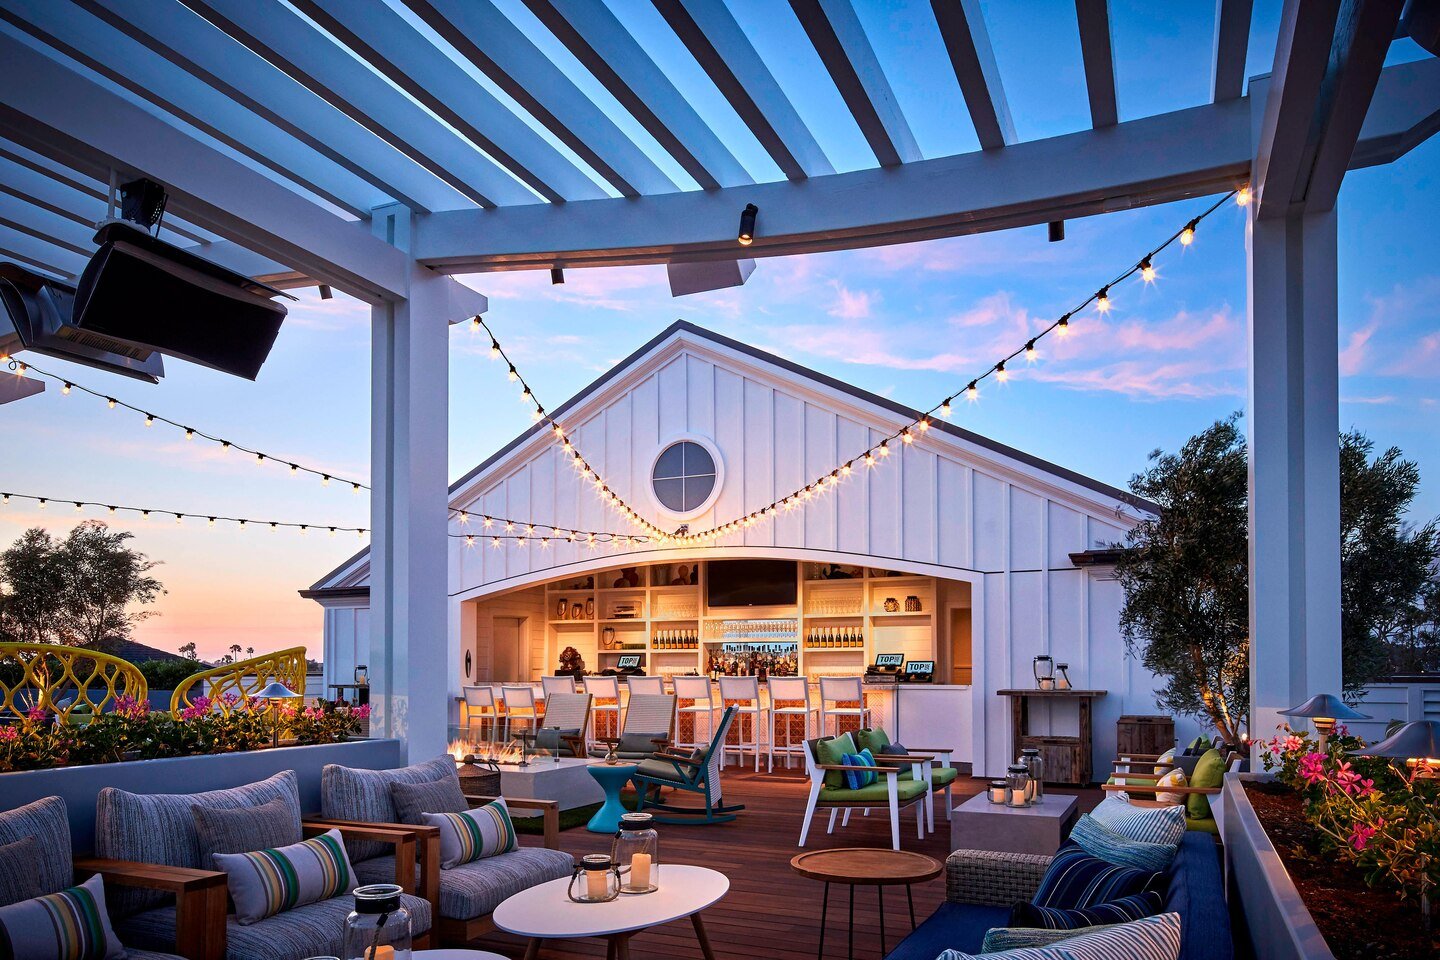  Hotel options are plentiful. Our pick? Lido House and its luxe cottage suites. Lido’s rooftop bar is the right place for sunset cocktails.   Photos courtesy Lido House  